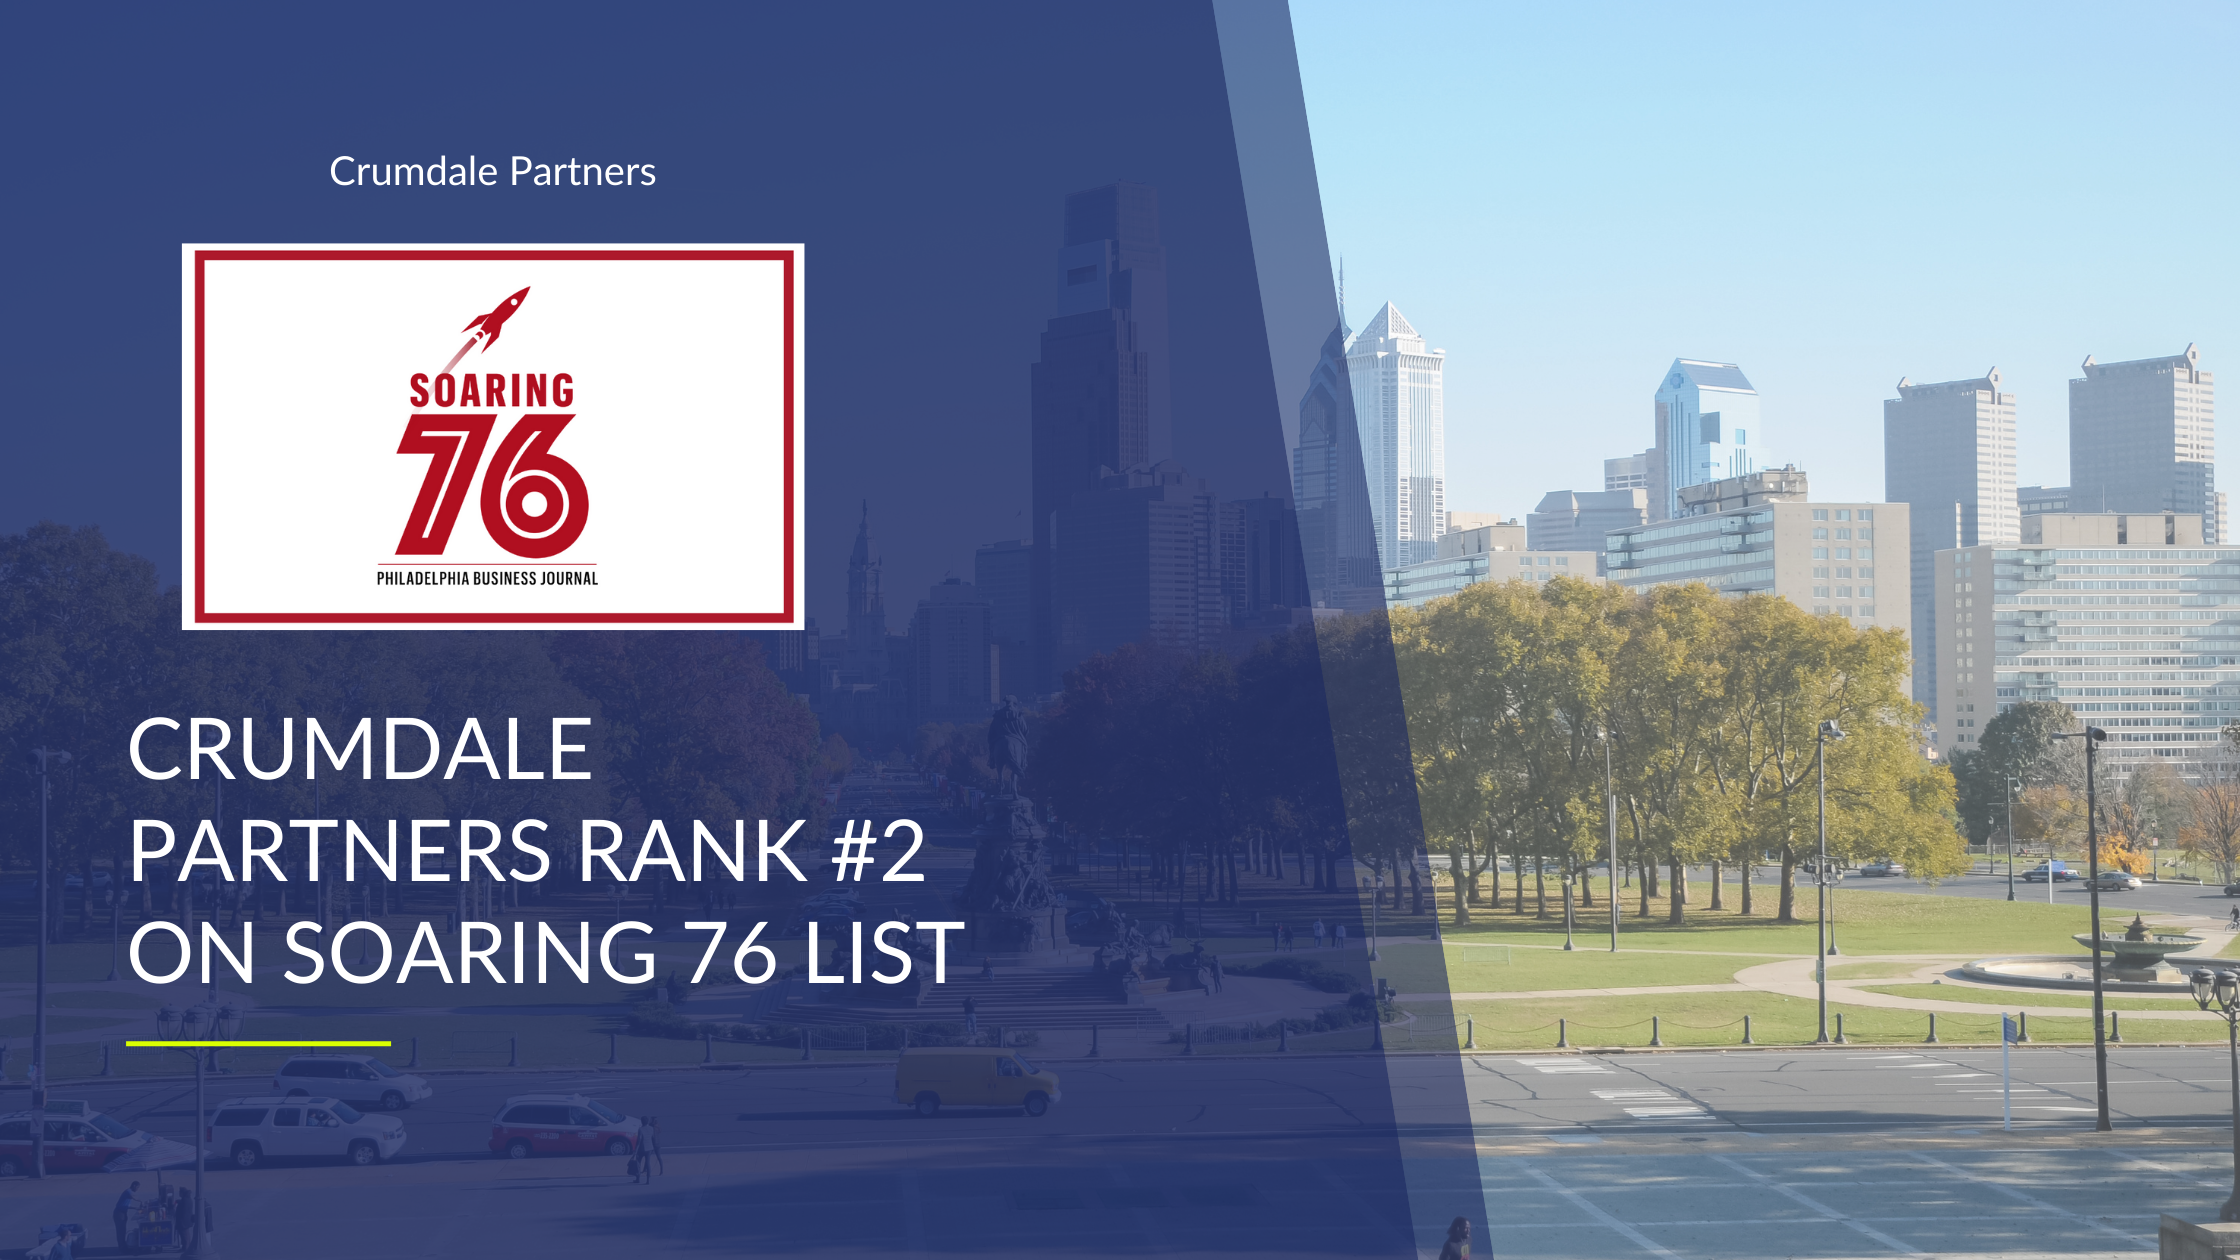 Crumdale Partners Makes the “Soaring 76” list Ranking #2